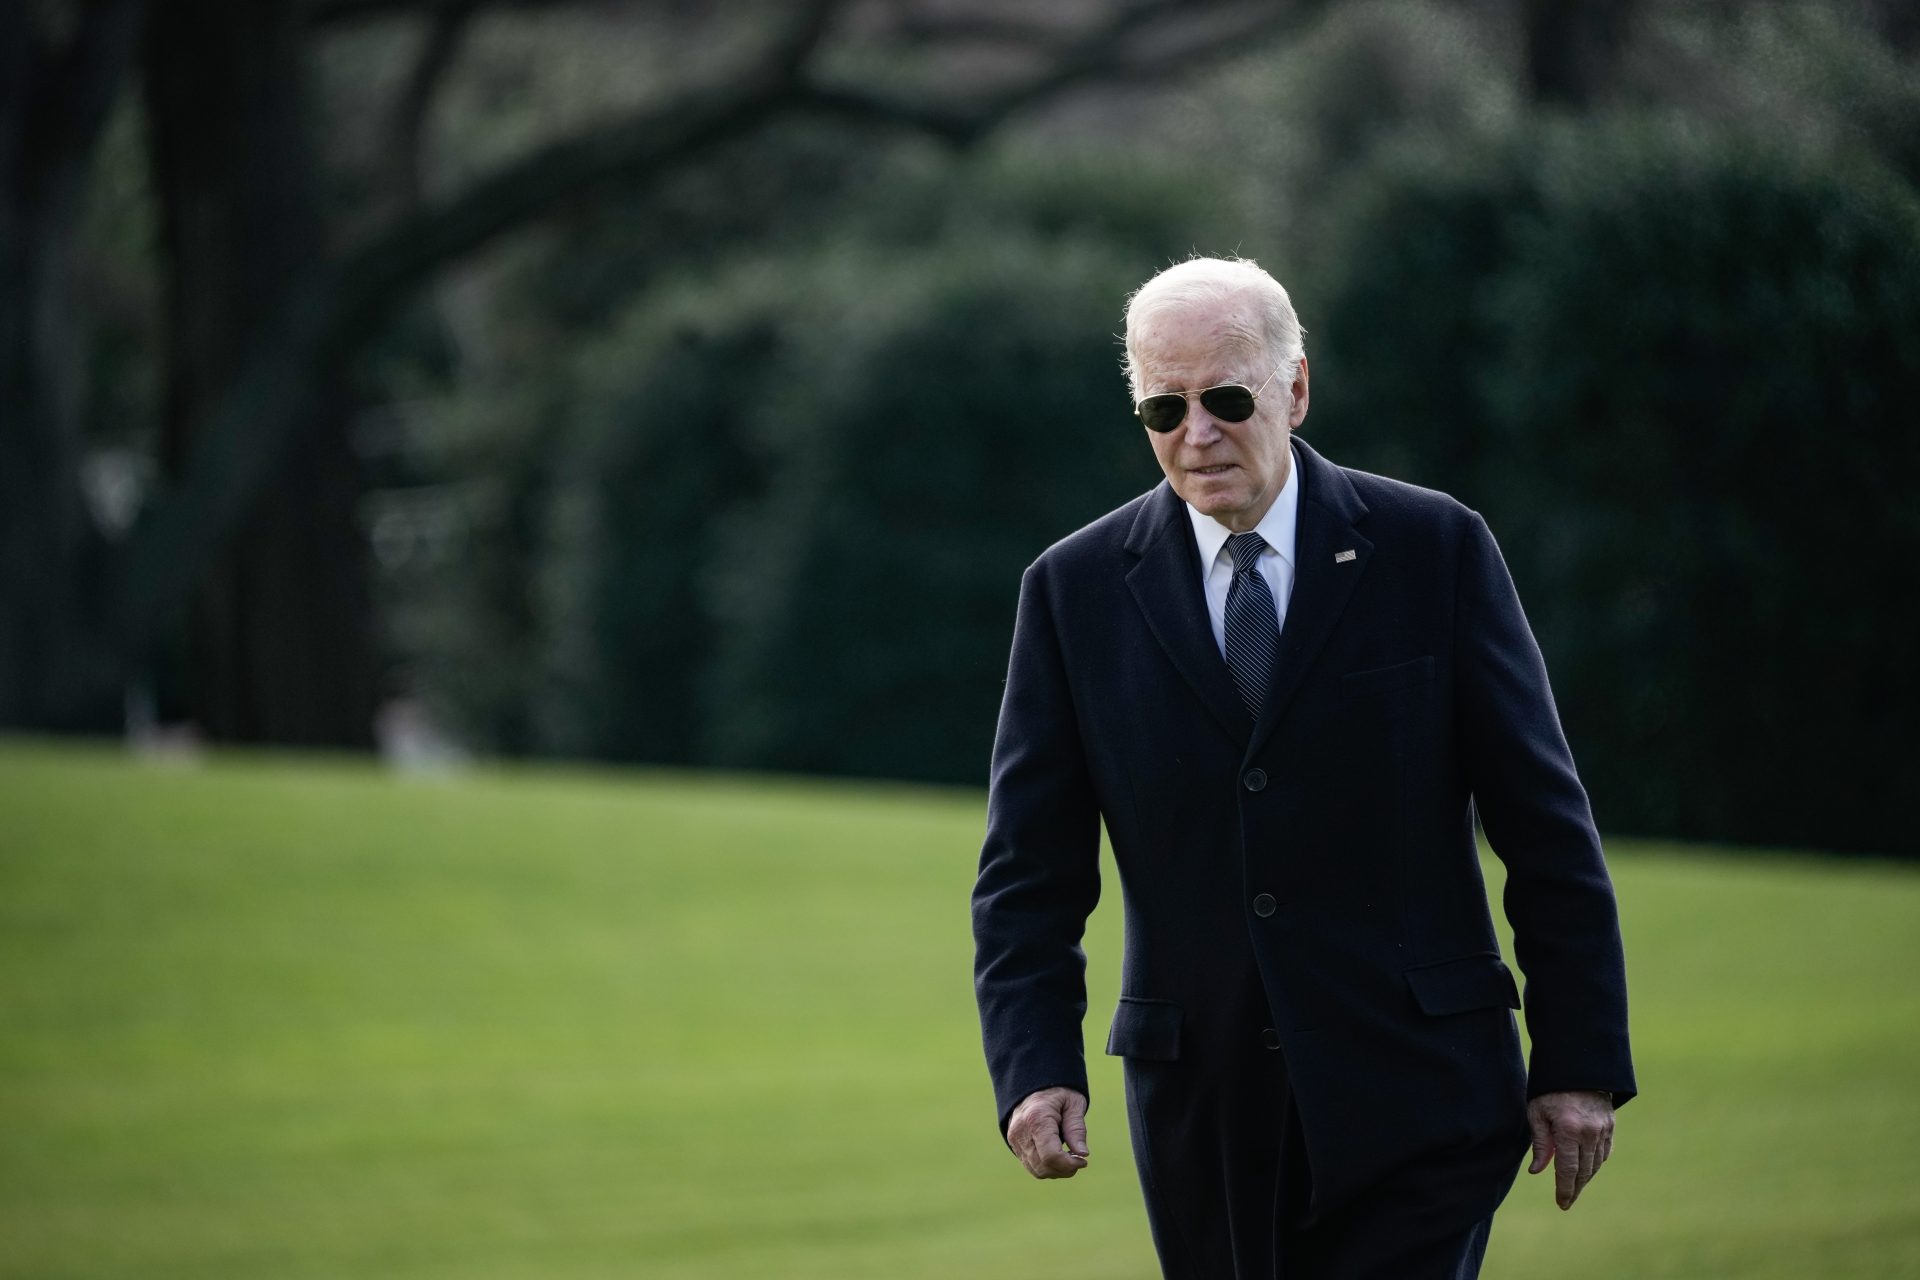 President Biden To Pardon Thousands Convicted On Cannabis Charges In Washington D.C. And Federal Lands thumbnail